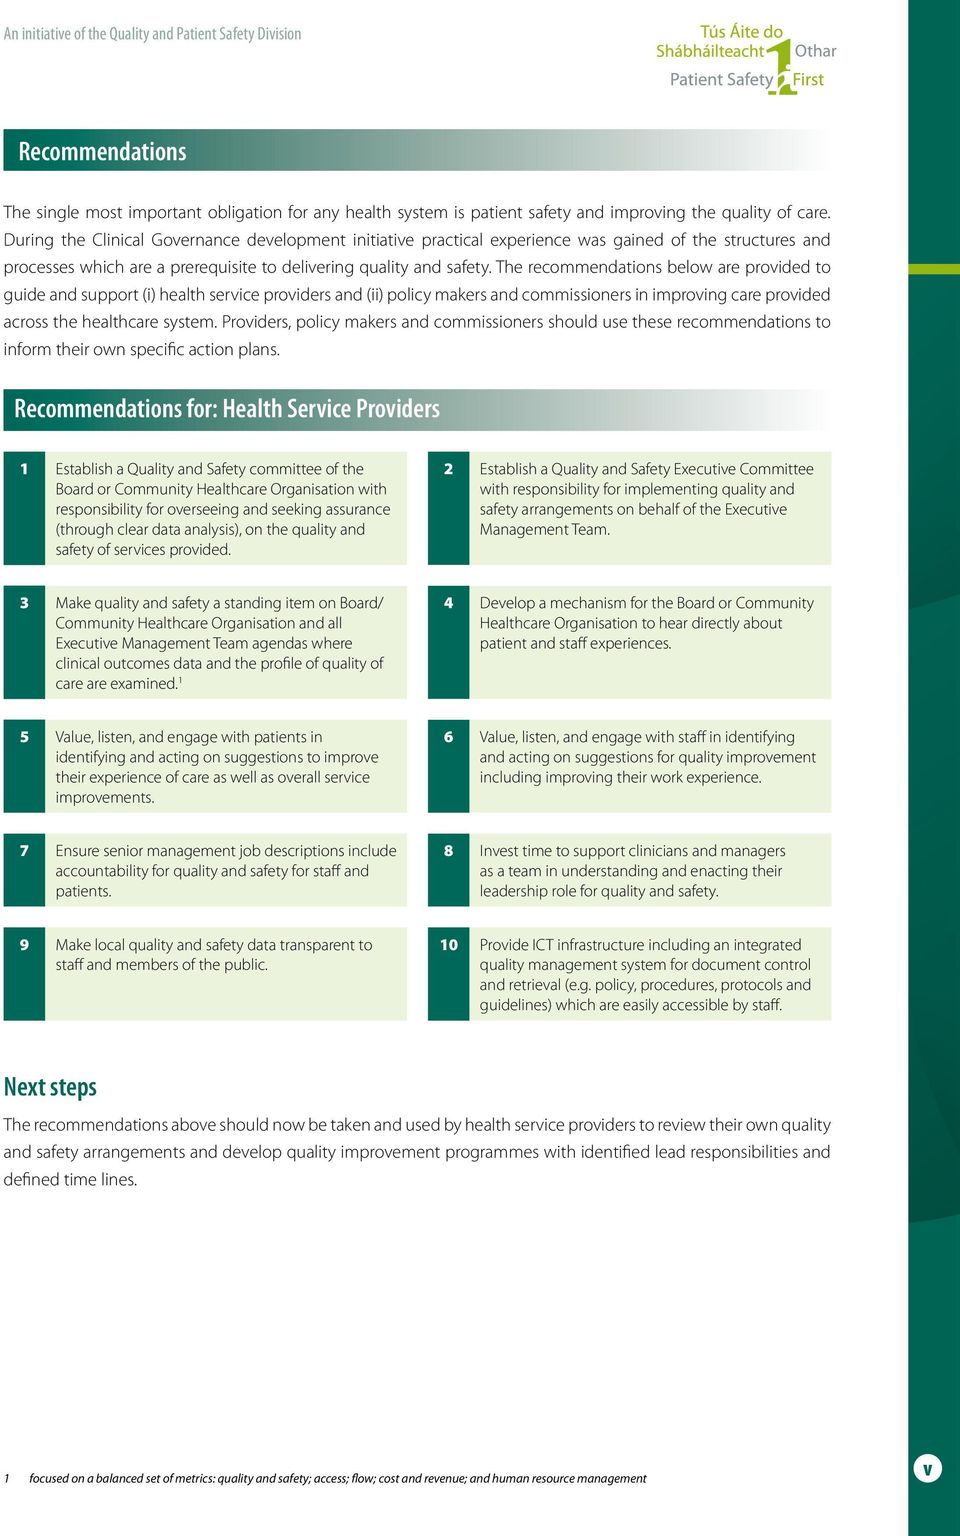 The recommendations below are provided to guide and support (i) health service providers and (ii) policy makers and commissioners in improving care provided across the healthcare system.